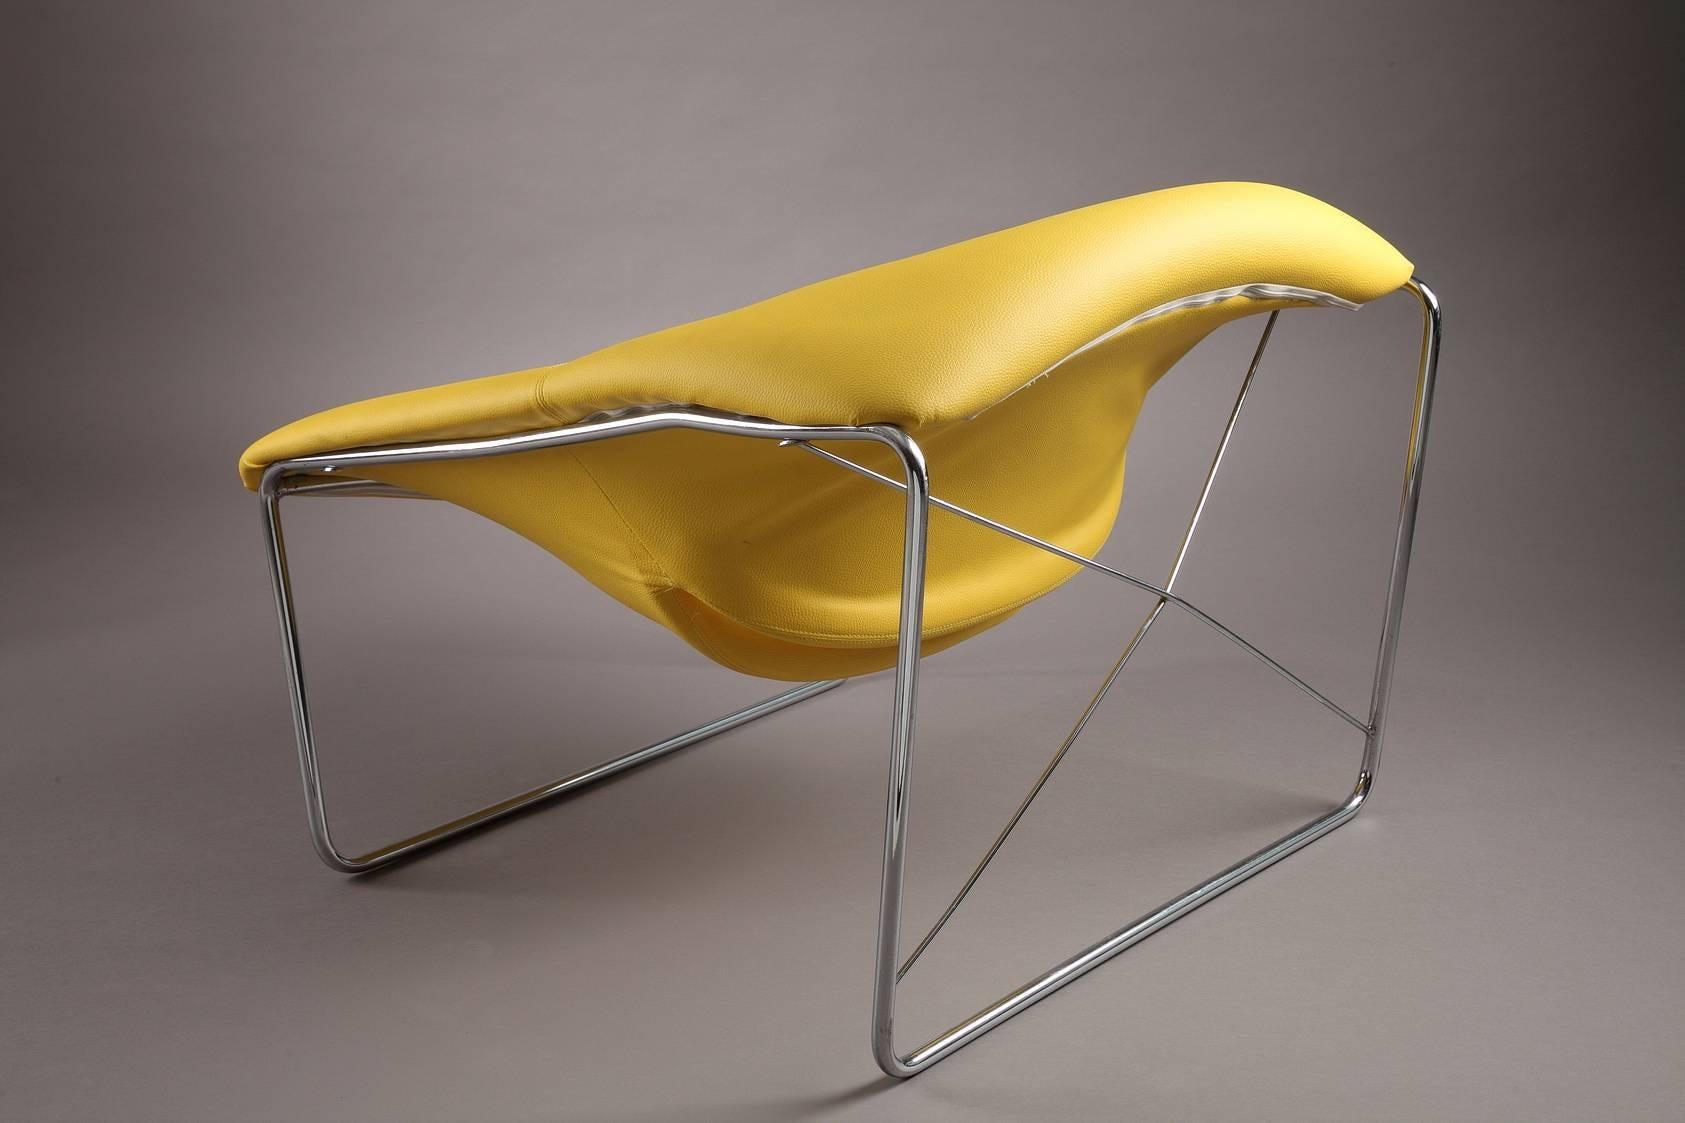 French Cubique Chair with Steel Frame and Yellow Leather-Like Basis